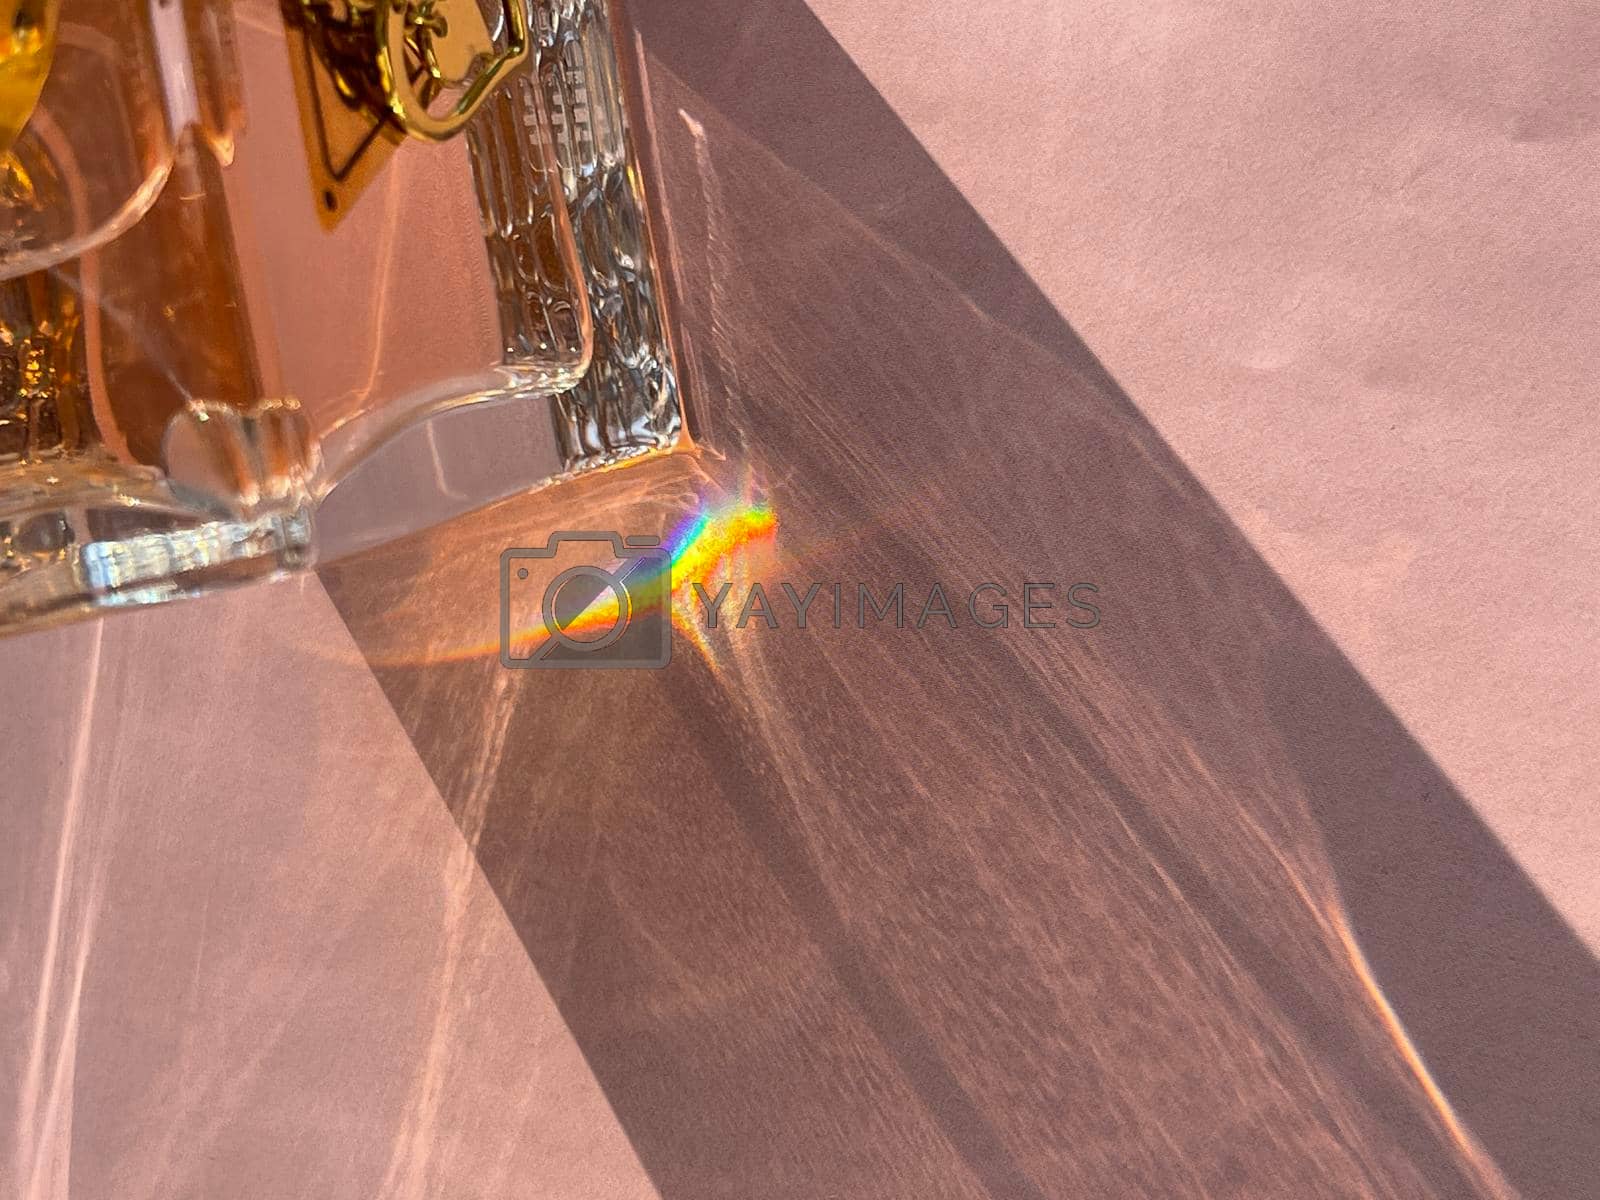 Royalty free image of Sunlight refracting through glass by MAD_Production